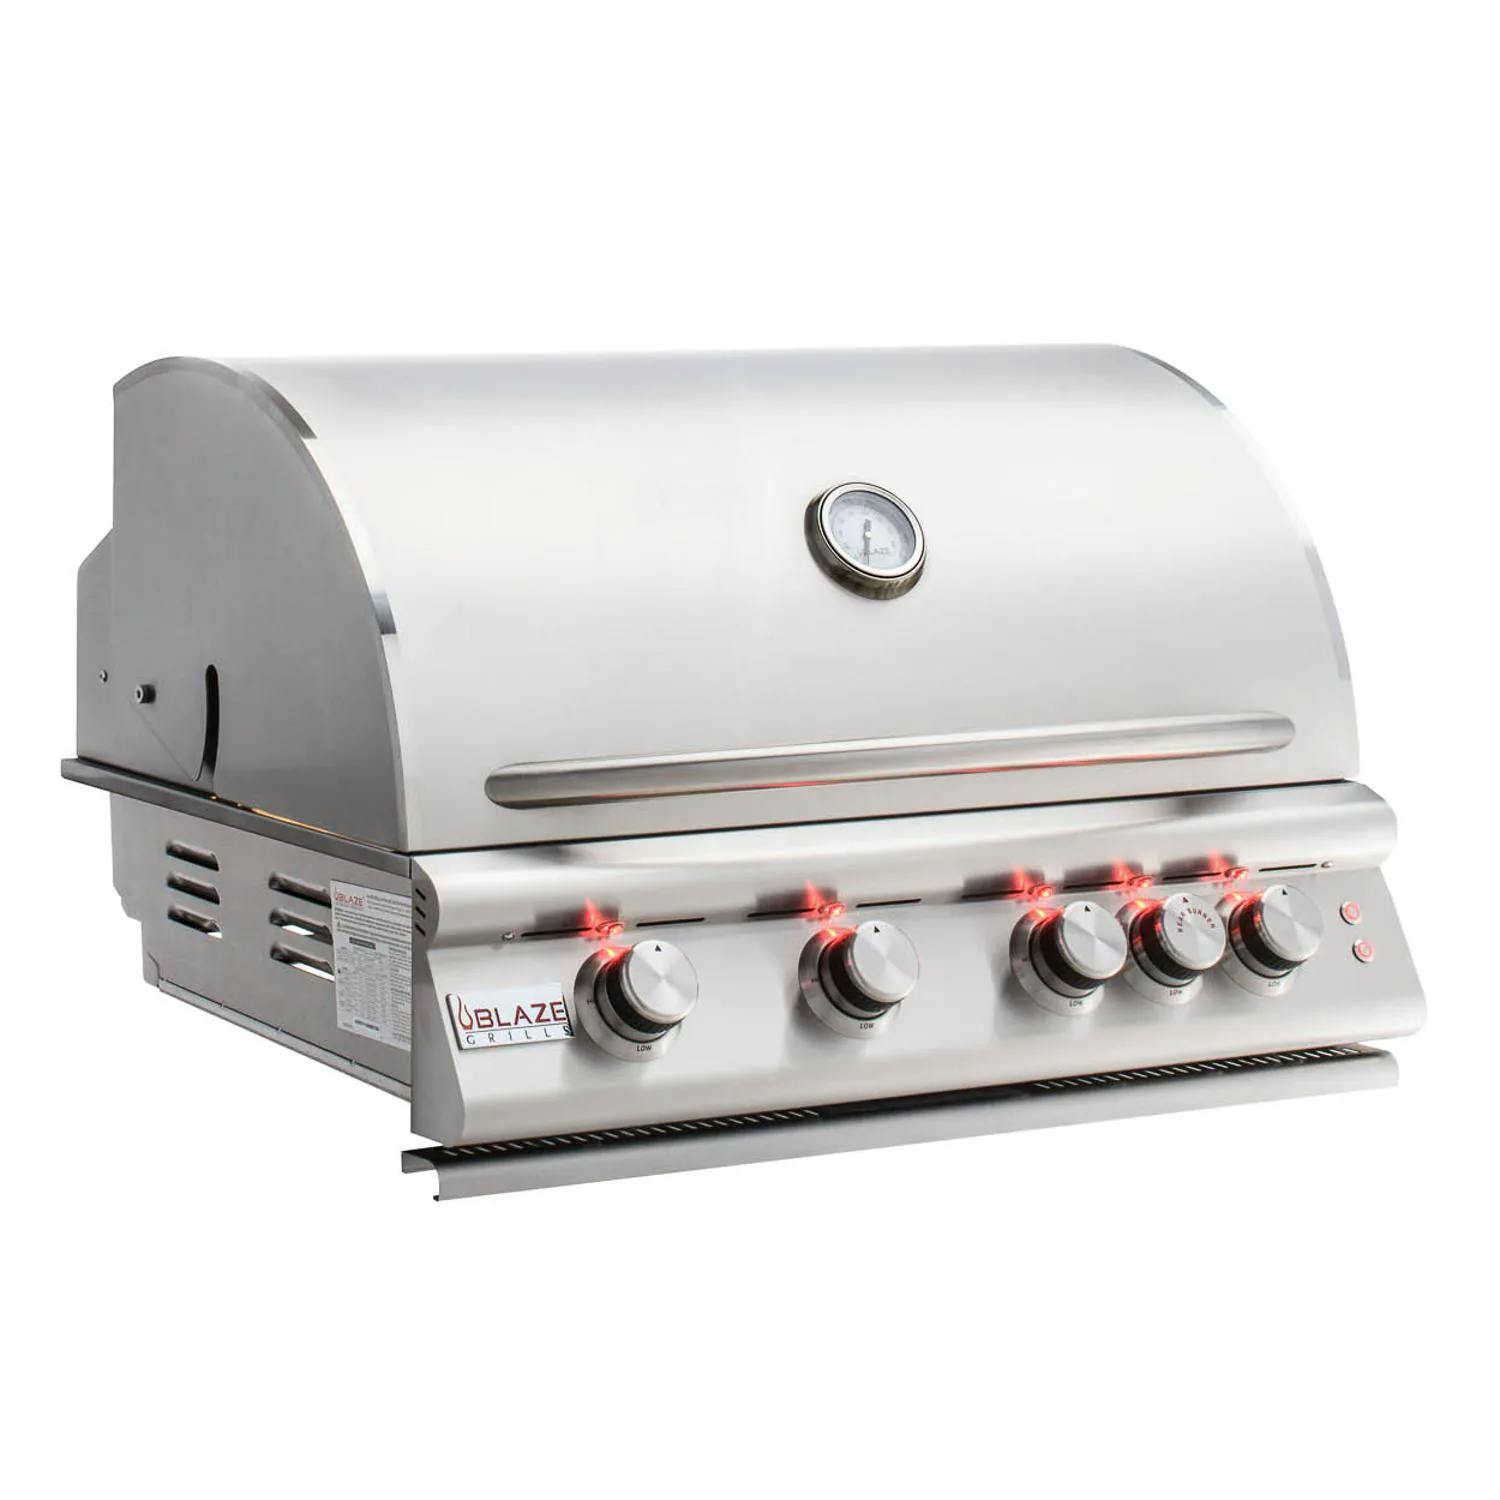 Blaze Premium LTE Marine Grade Built-In Gas Grill with Rear Infrared Burner and Grill Lights